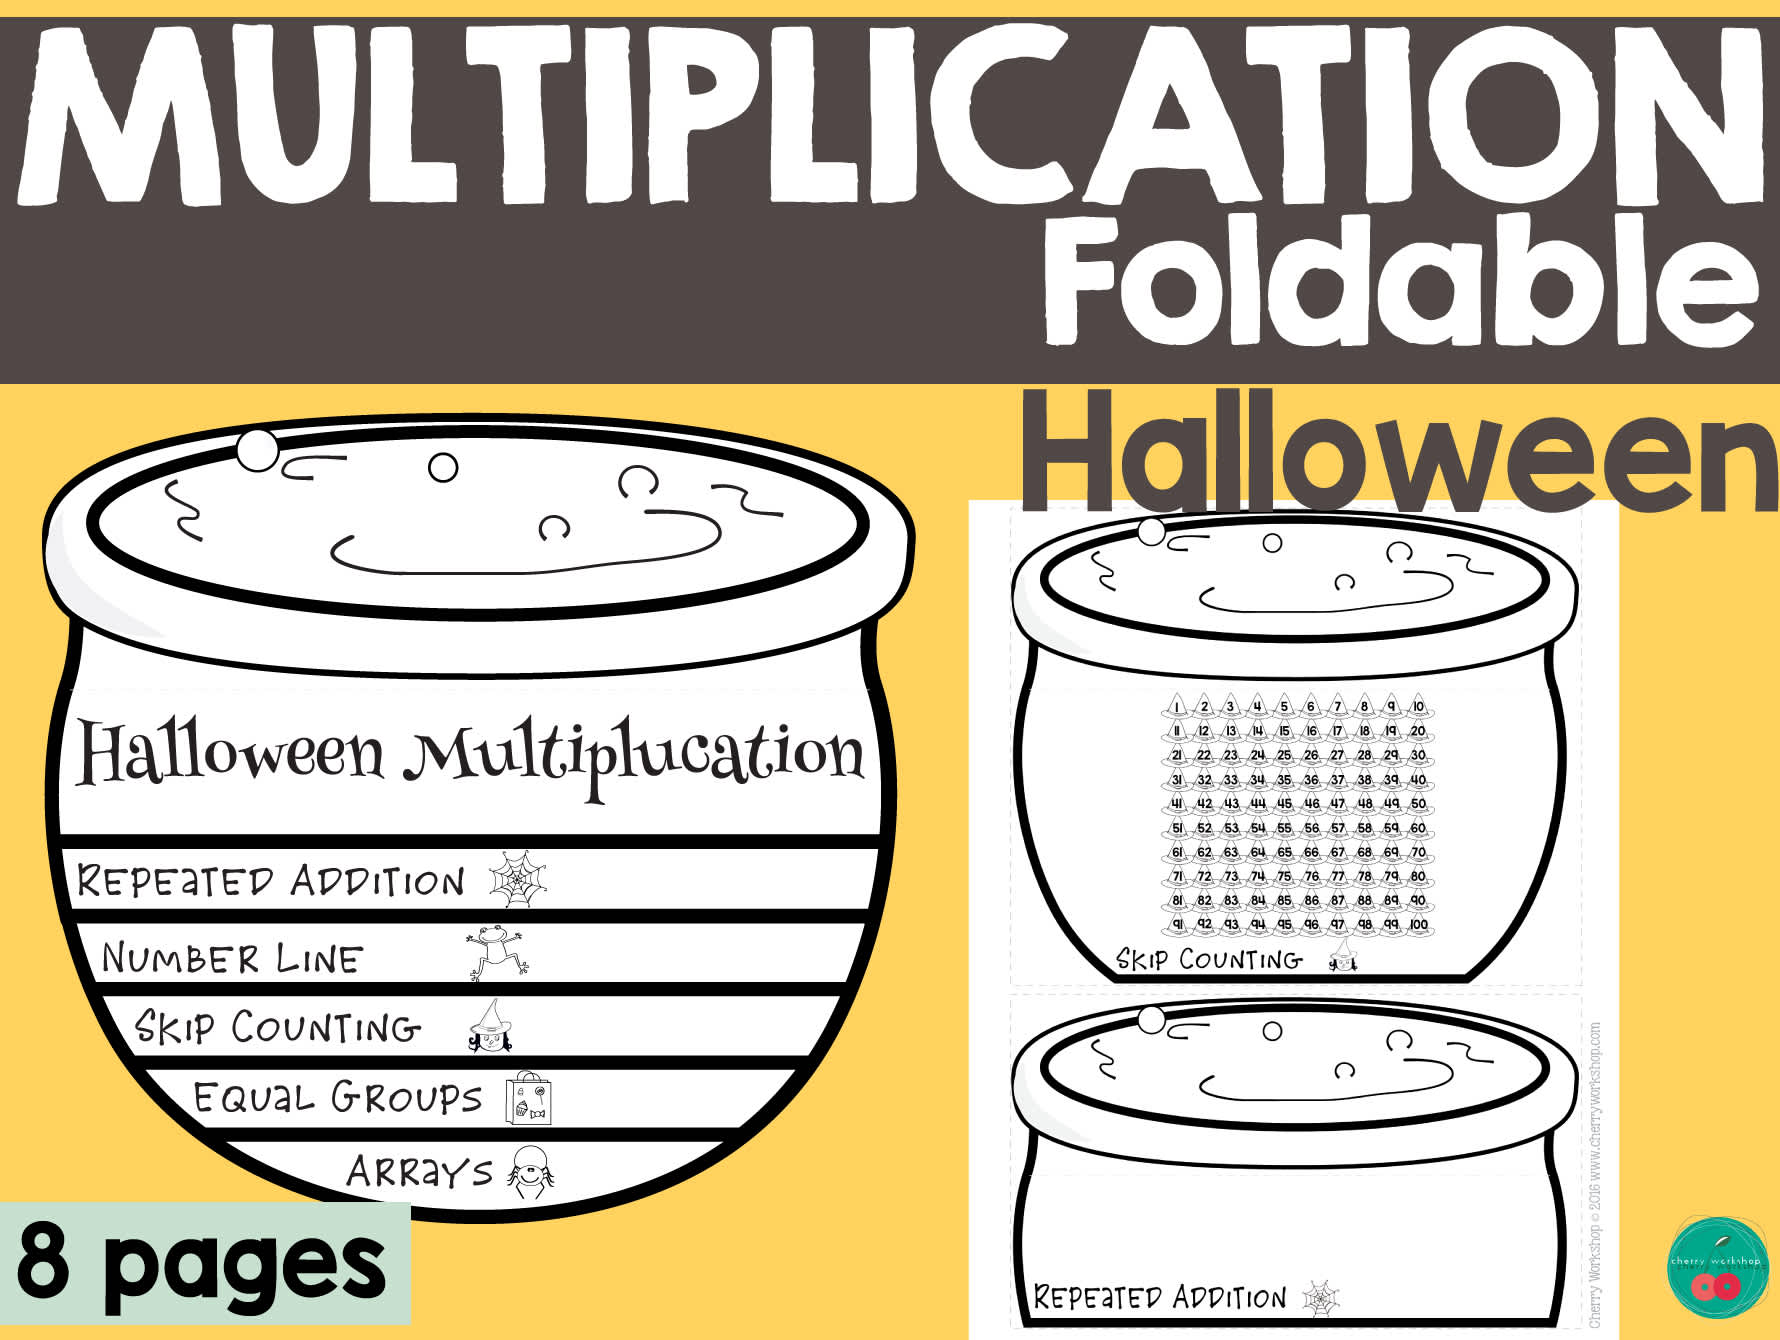 halloween-multiplication-and-repeated-addition-posters-x5b-by-teach-simple